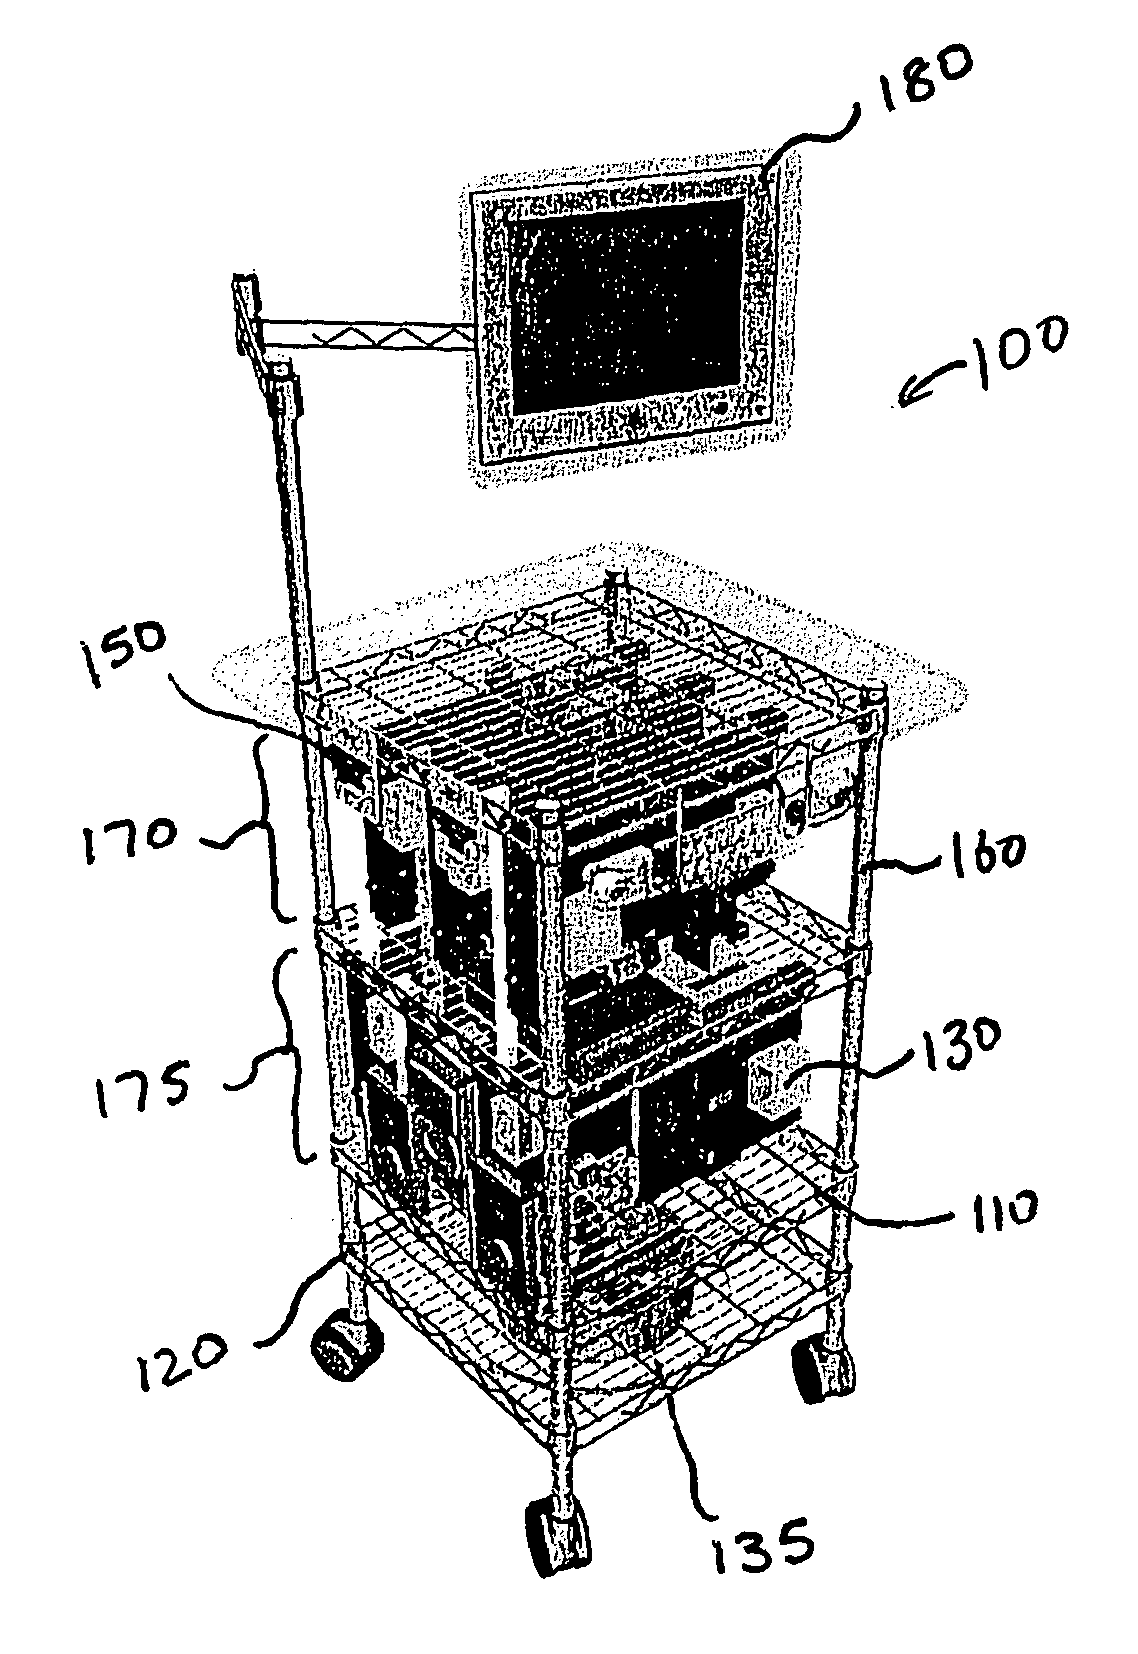 Housing assembly for stacking multiple computer modules